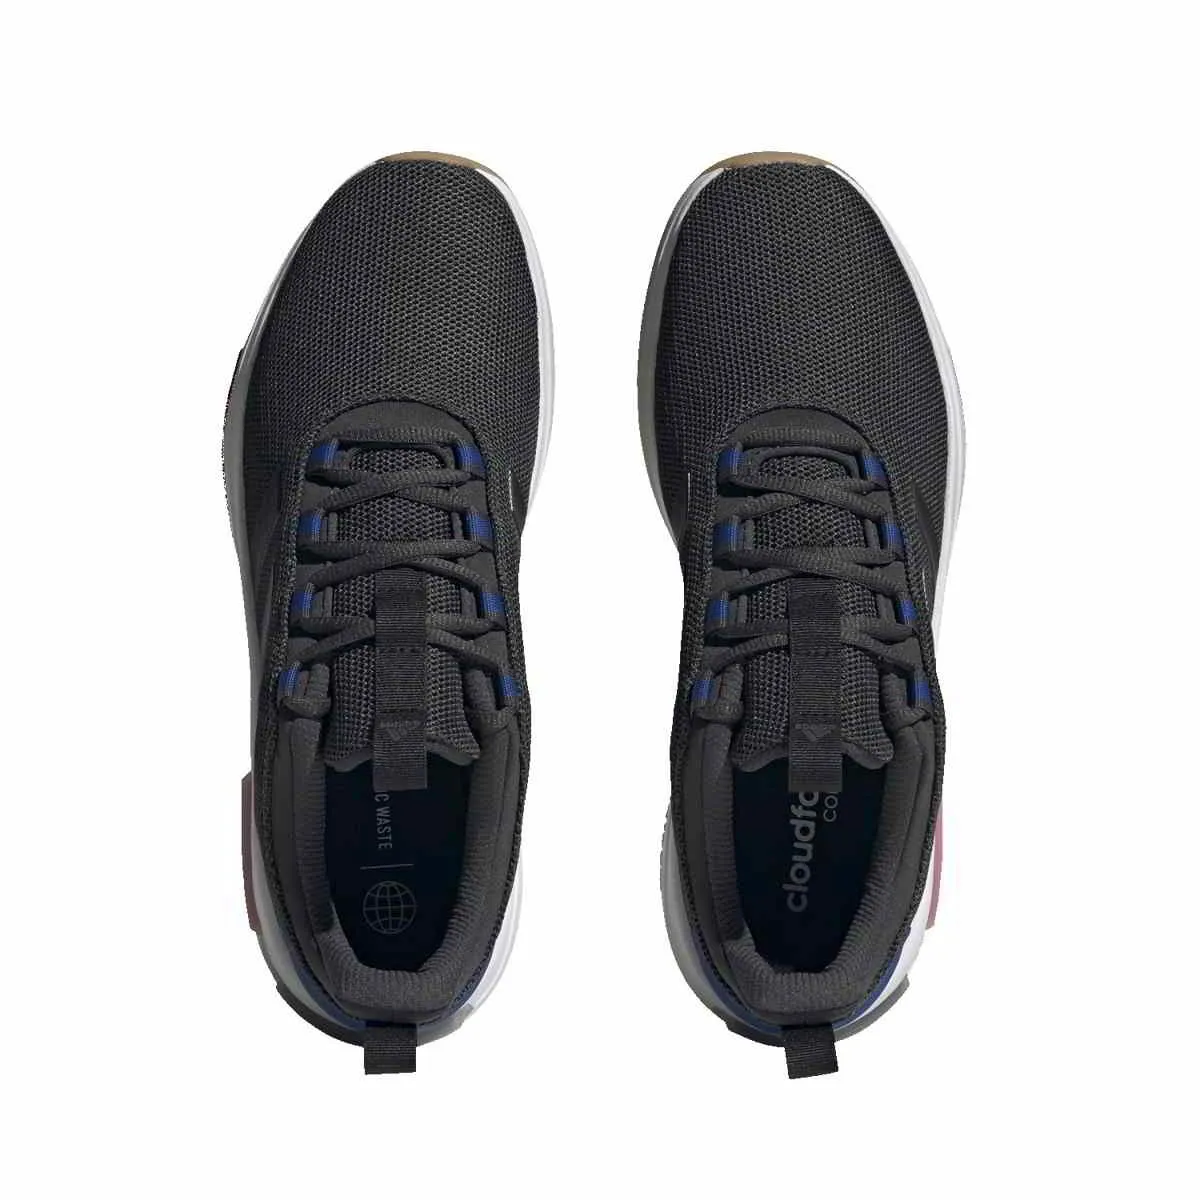 Chaussures adidas Racer TR23 carbone/noir/royal